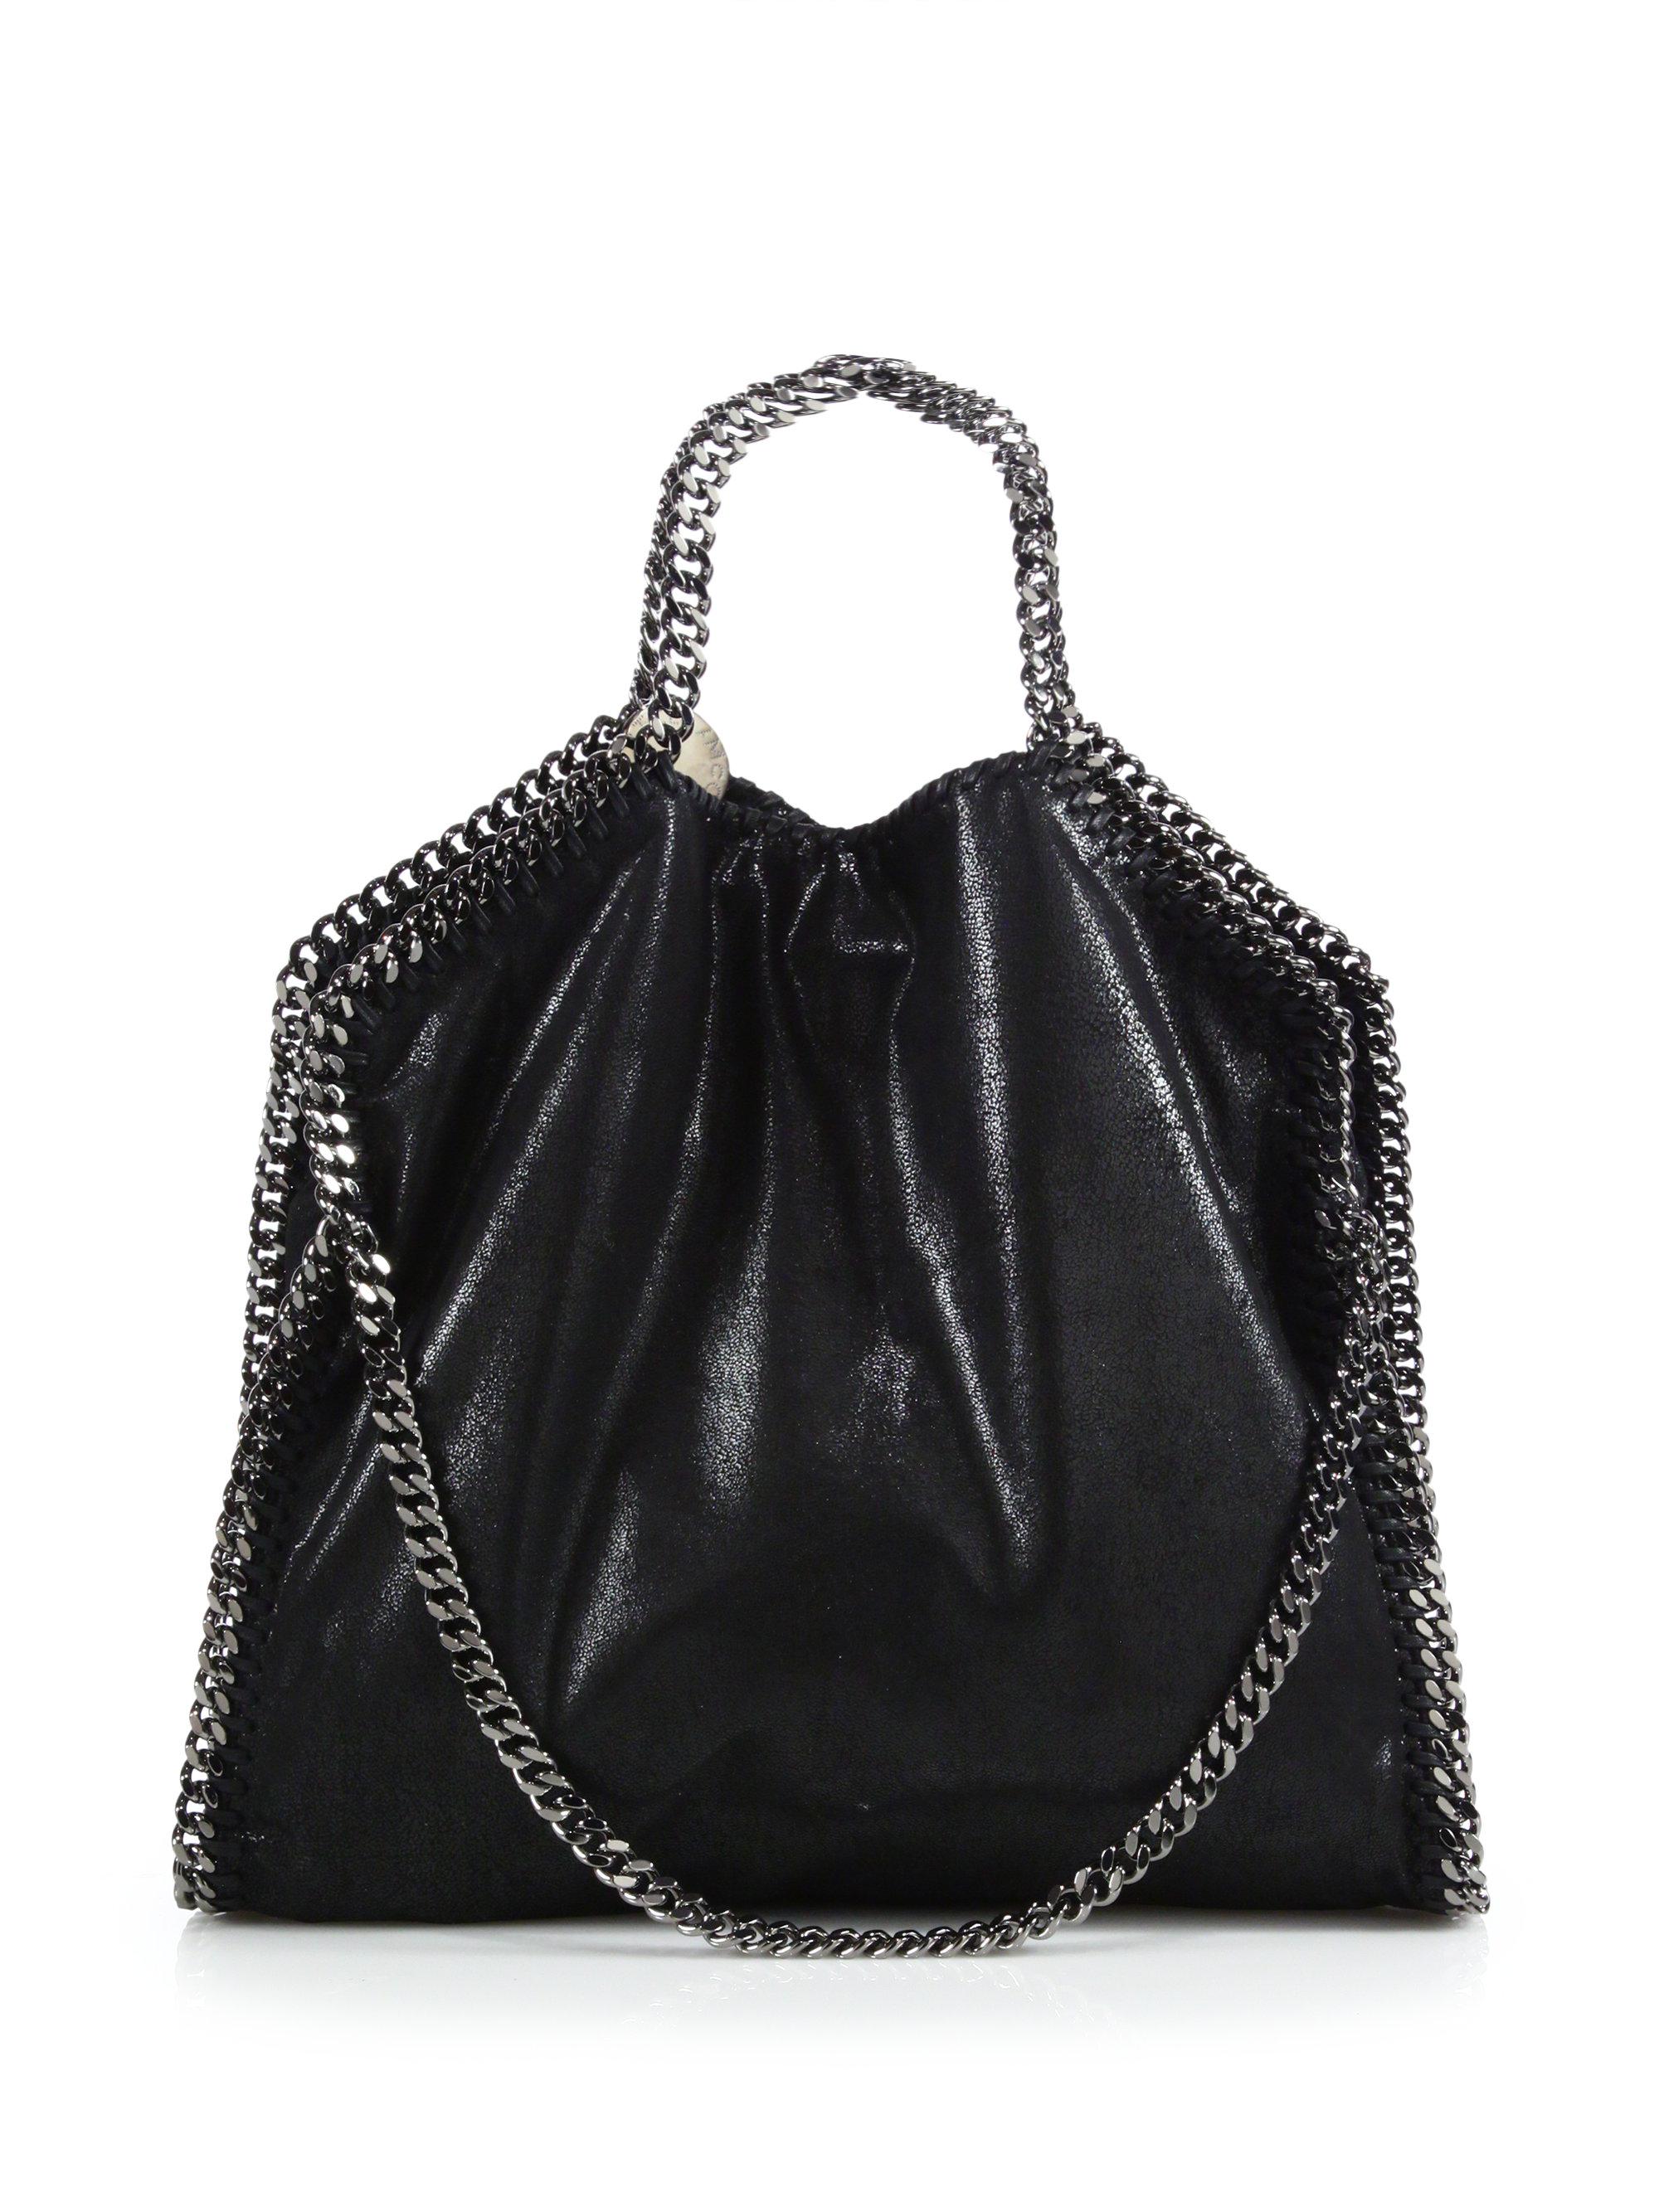 Lyst - Stella Mccartney Shaggy Deer Falabella Fold-over Small Tote in ...